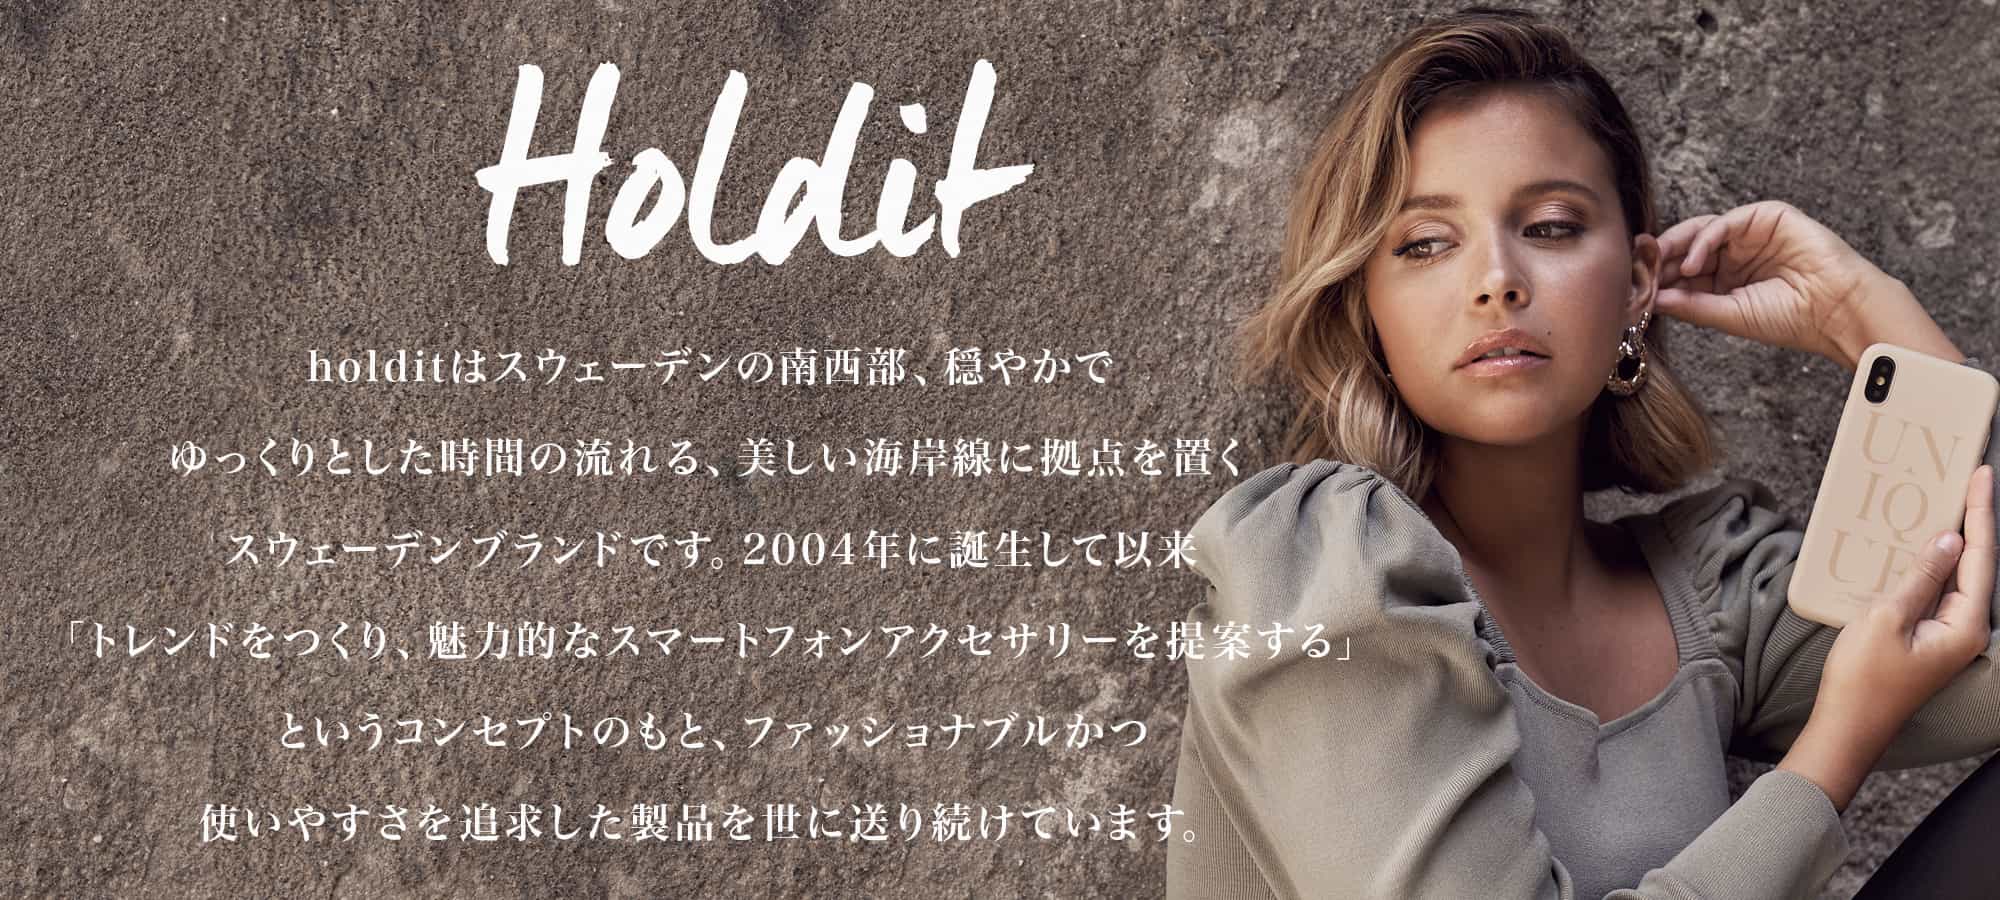 Holdit 北欧スウェーデンのスマホブランド Lauda Official Shop